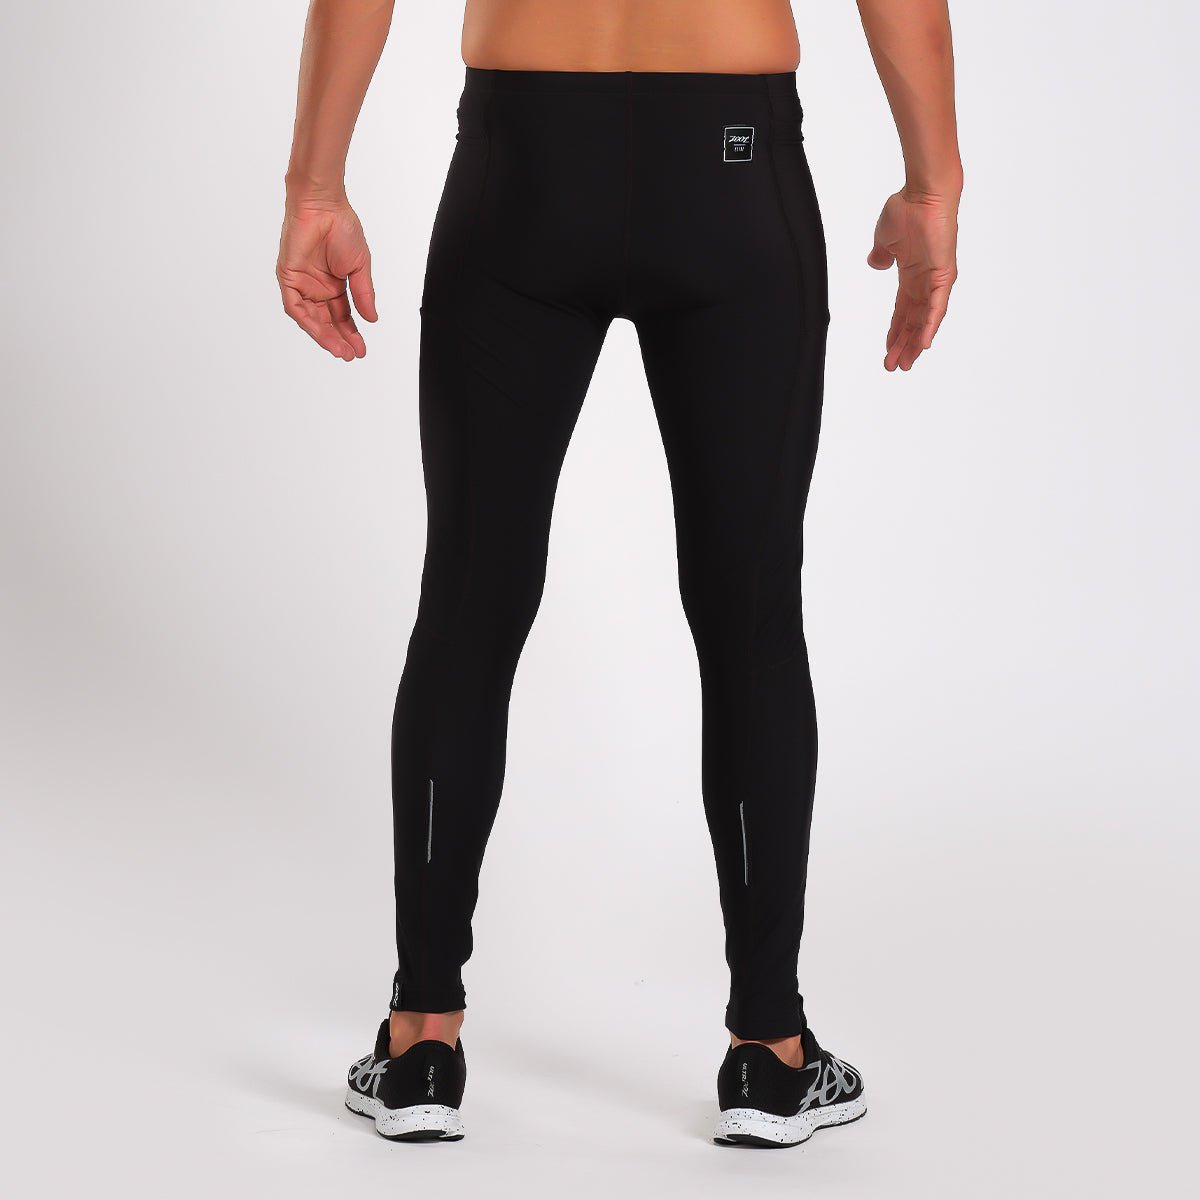 Expert 3.0 Joint Support Compression Tight - Men's Black | CW-X